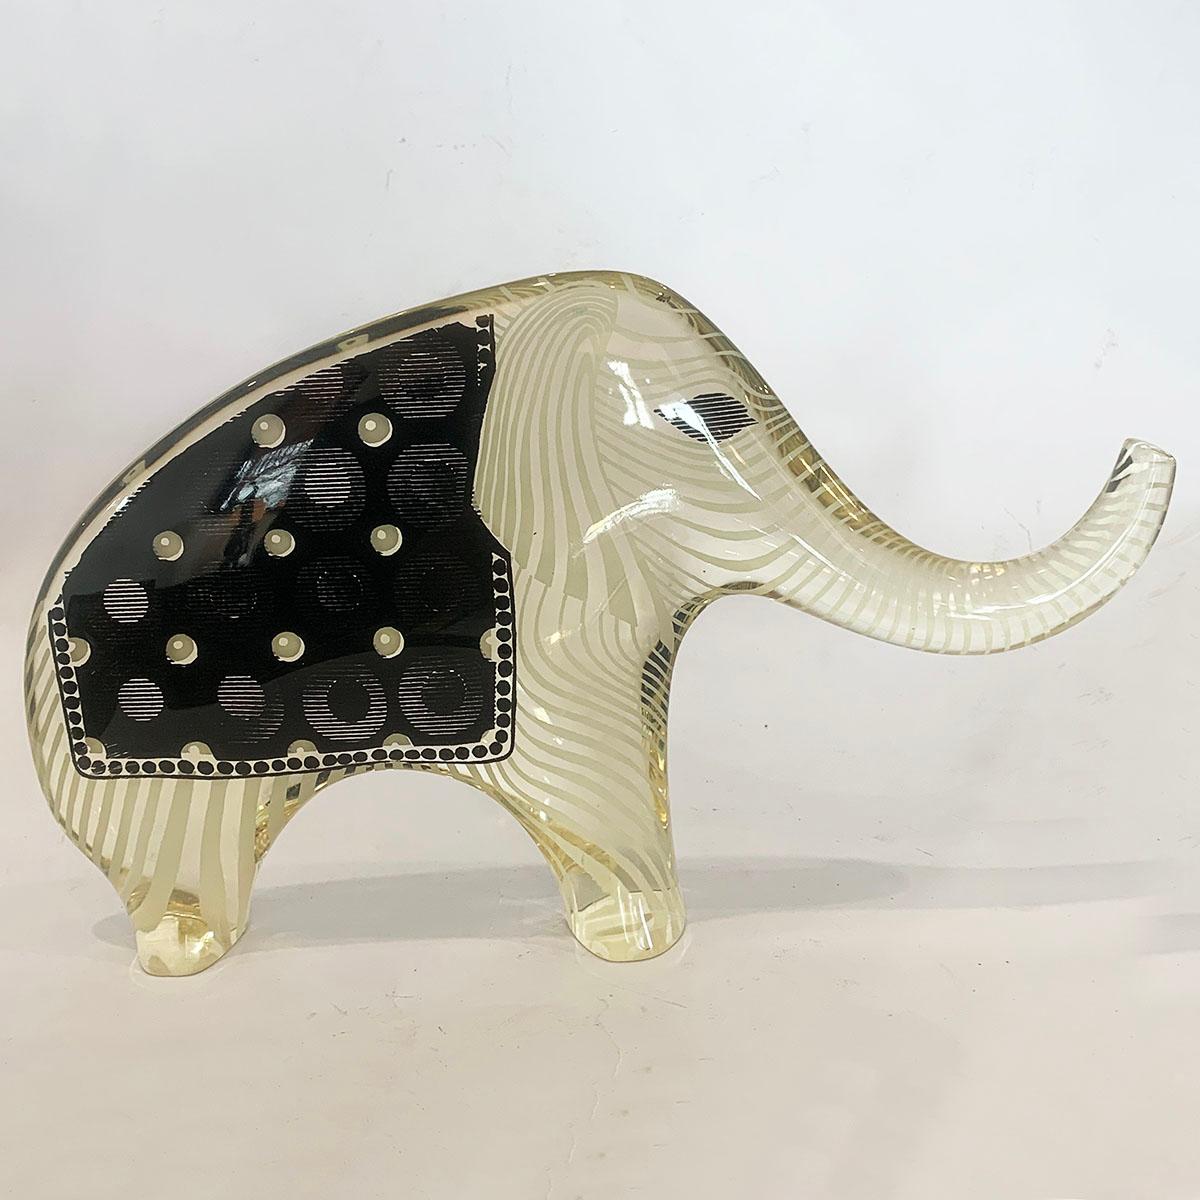 Midcentury optical illusion elephant in “Salute” stance, wearing patterned blanket, large size. In clear optic Lucite by Abraham Palatnik, Brazil, a world famous design by this great Artist. The clear French Lucite is curve moulded in 2 halves with